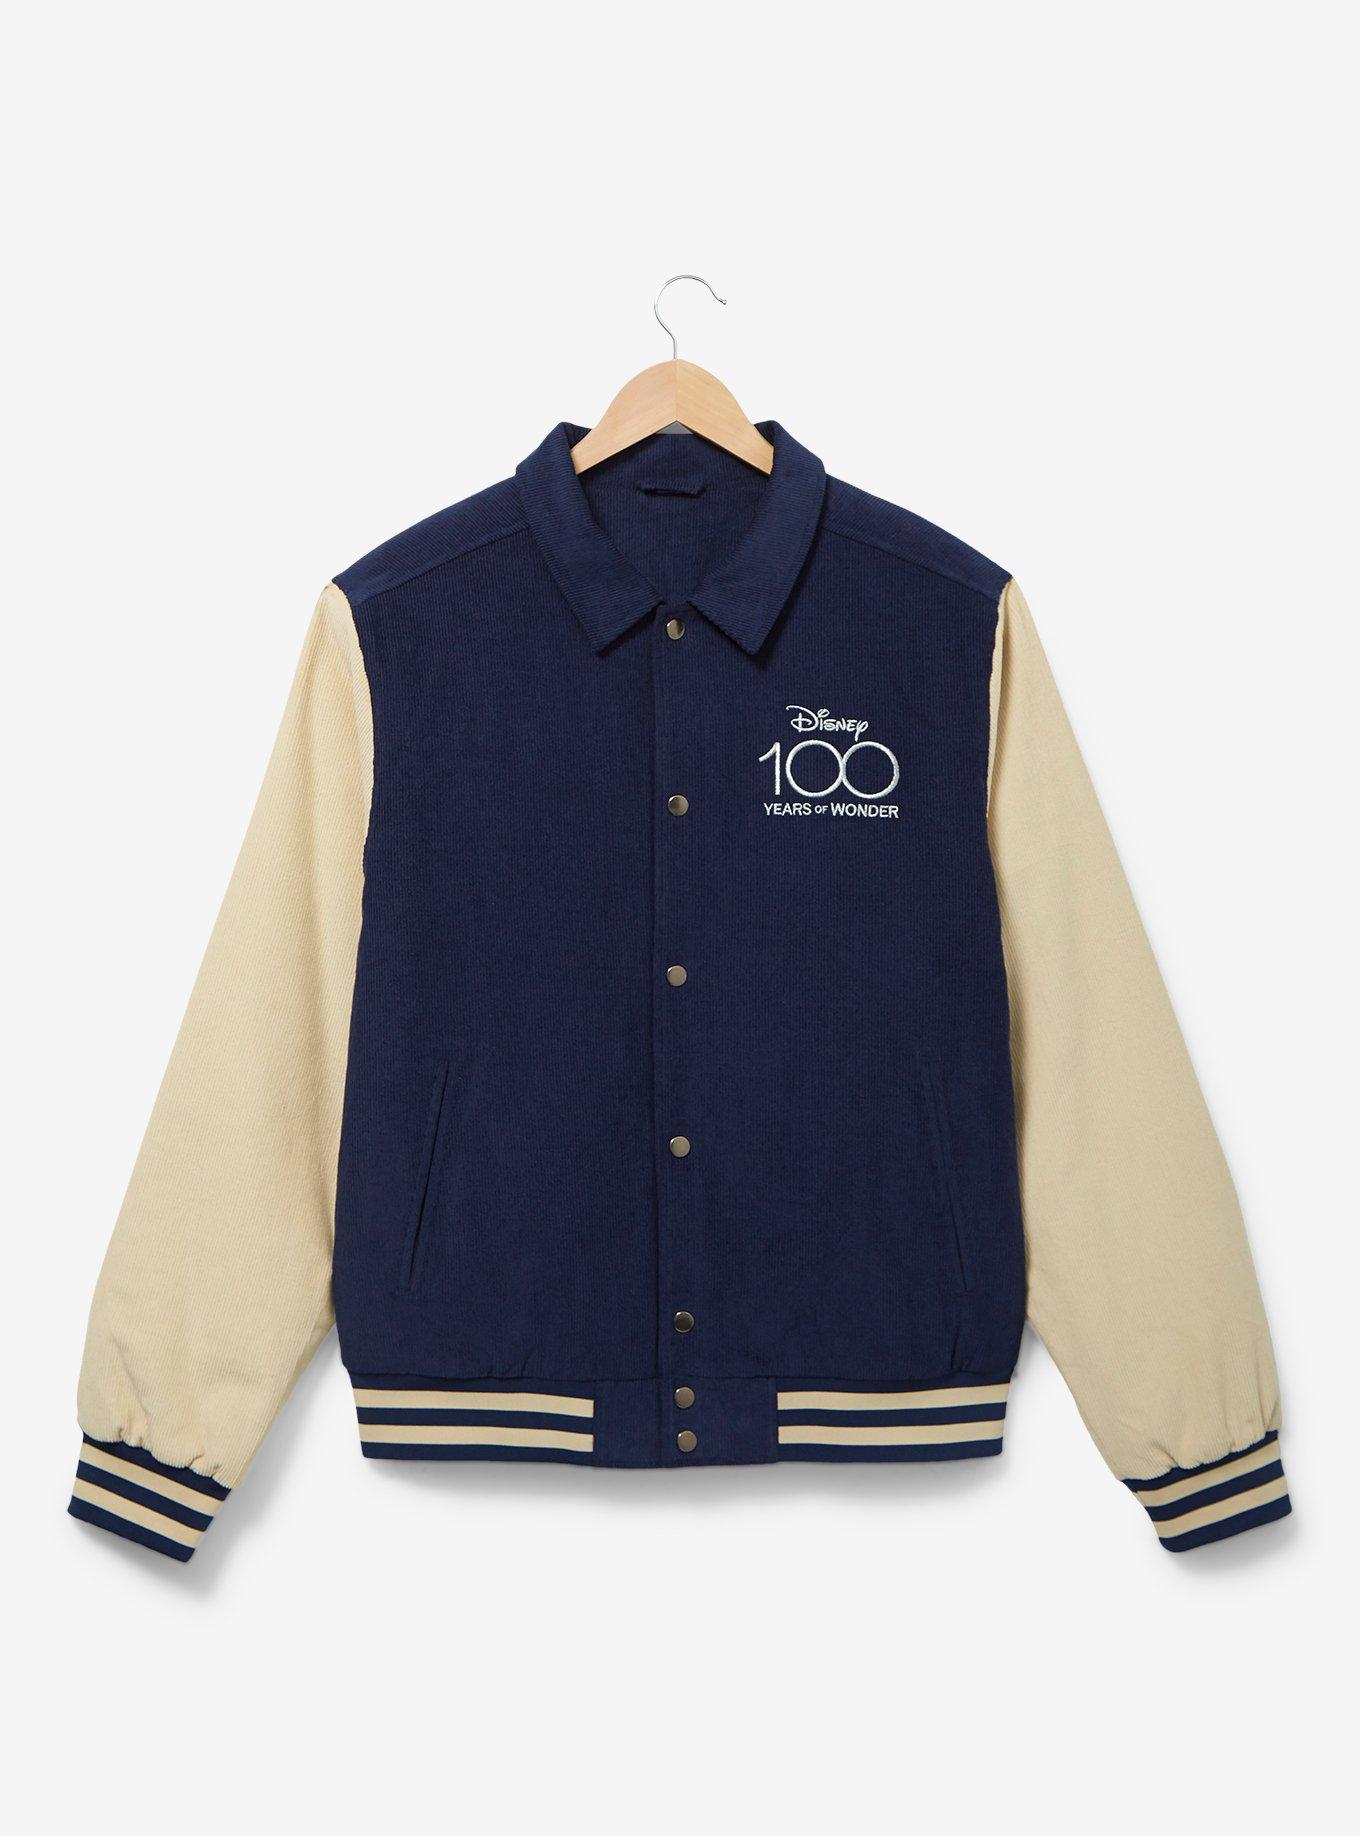 Disney 100 Mickey Mouse Collared Varsity Jacket - BoxLunch Exclusive, NAVY, hi-res